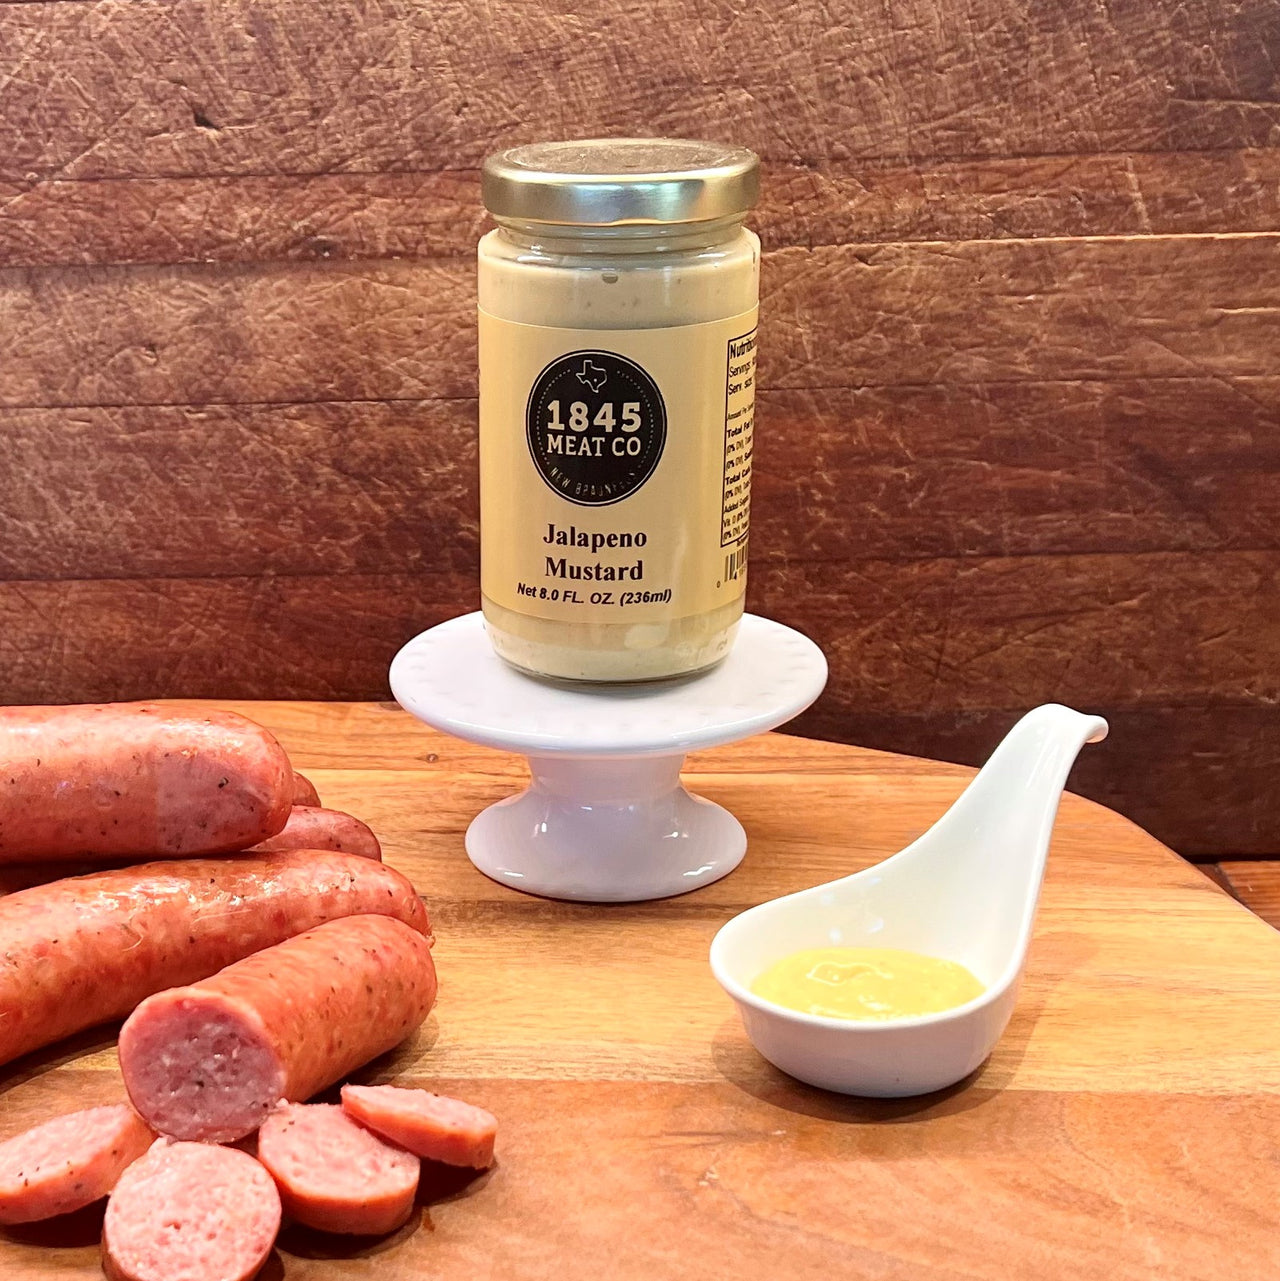 ﻿A mustard with a little infusion of South Texas heat!  Our Jalapeno Mustard pairs well with our Smoked Turkey Tenders or on a turkey sandwich for that added little bit of heat.